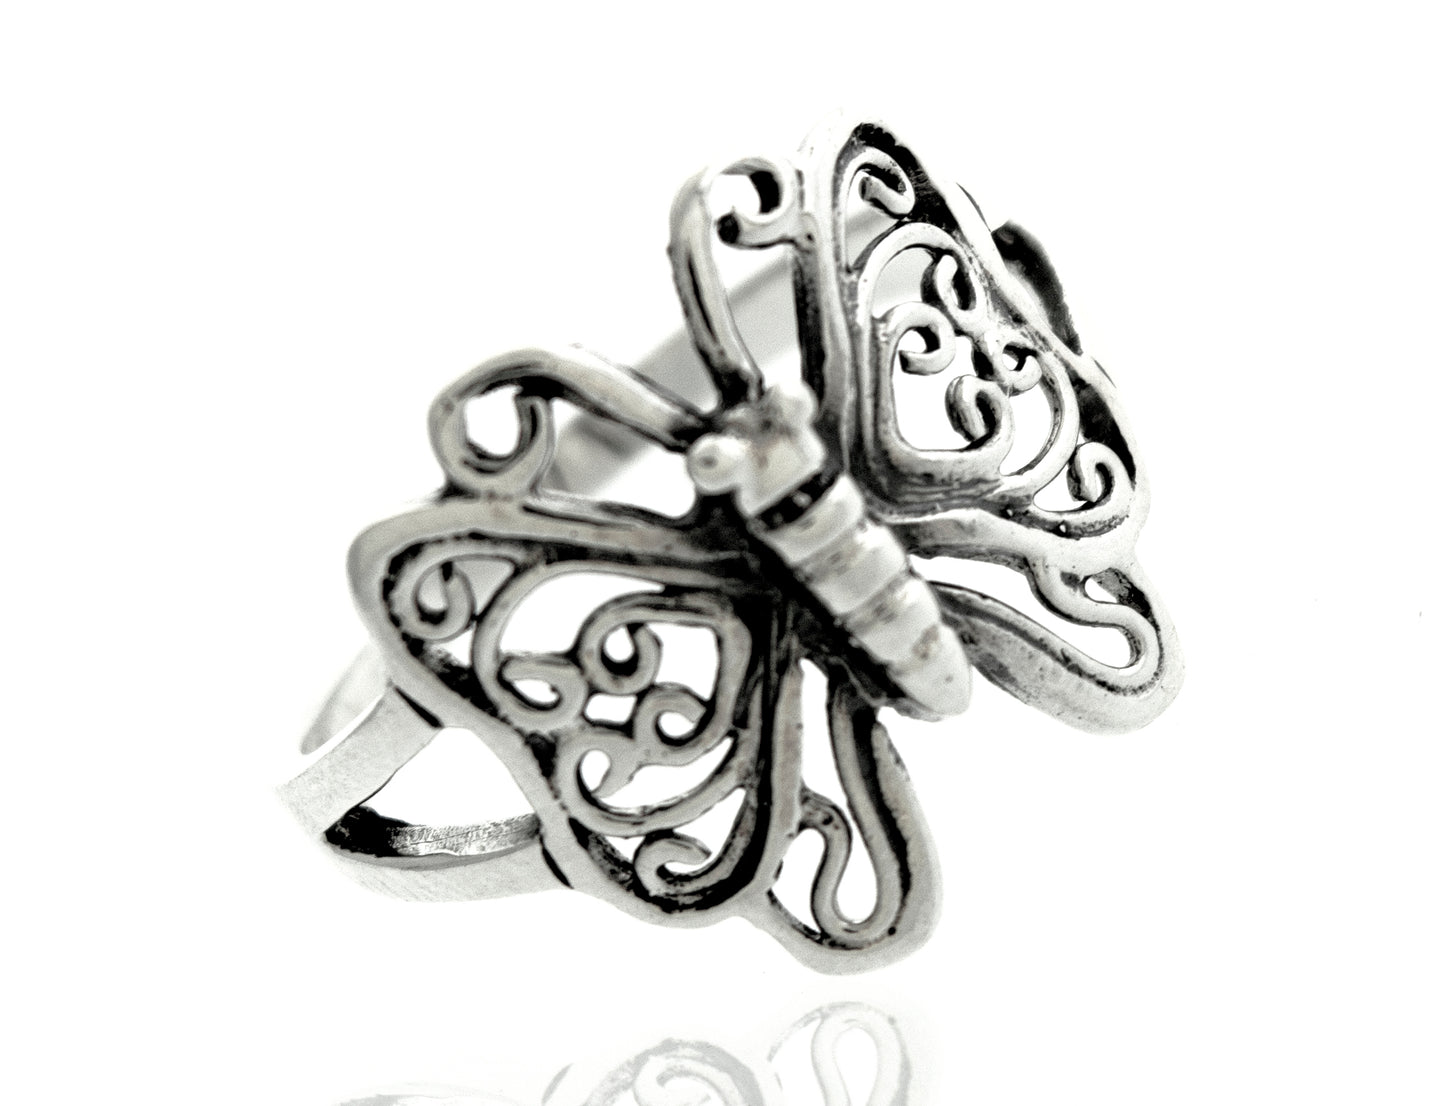 A Butterfly Ring With Filigree Design in sterling silver.